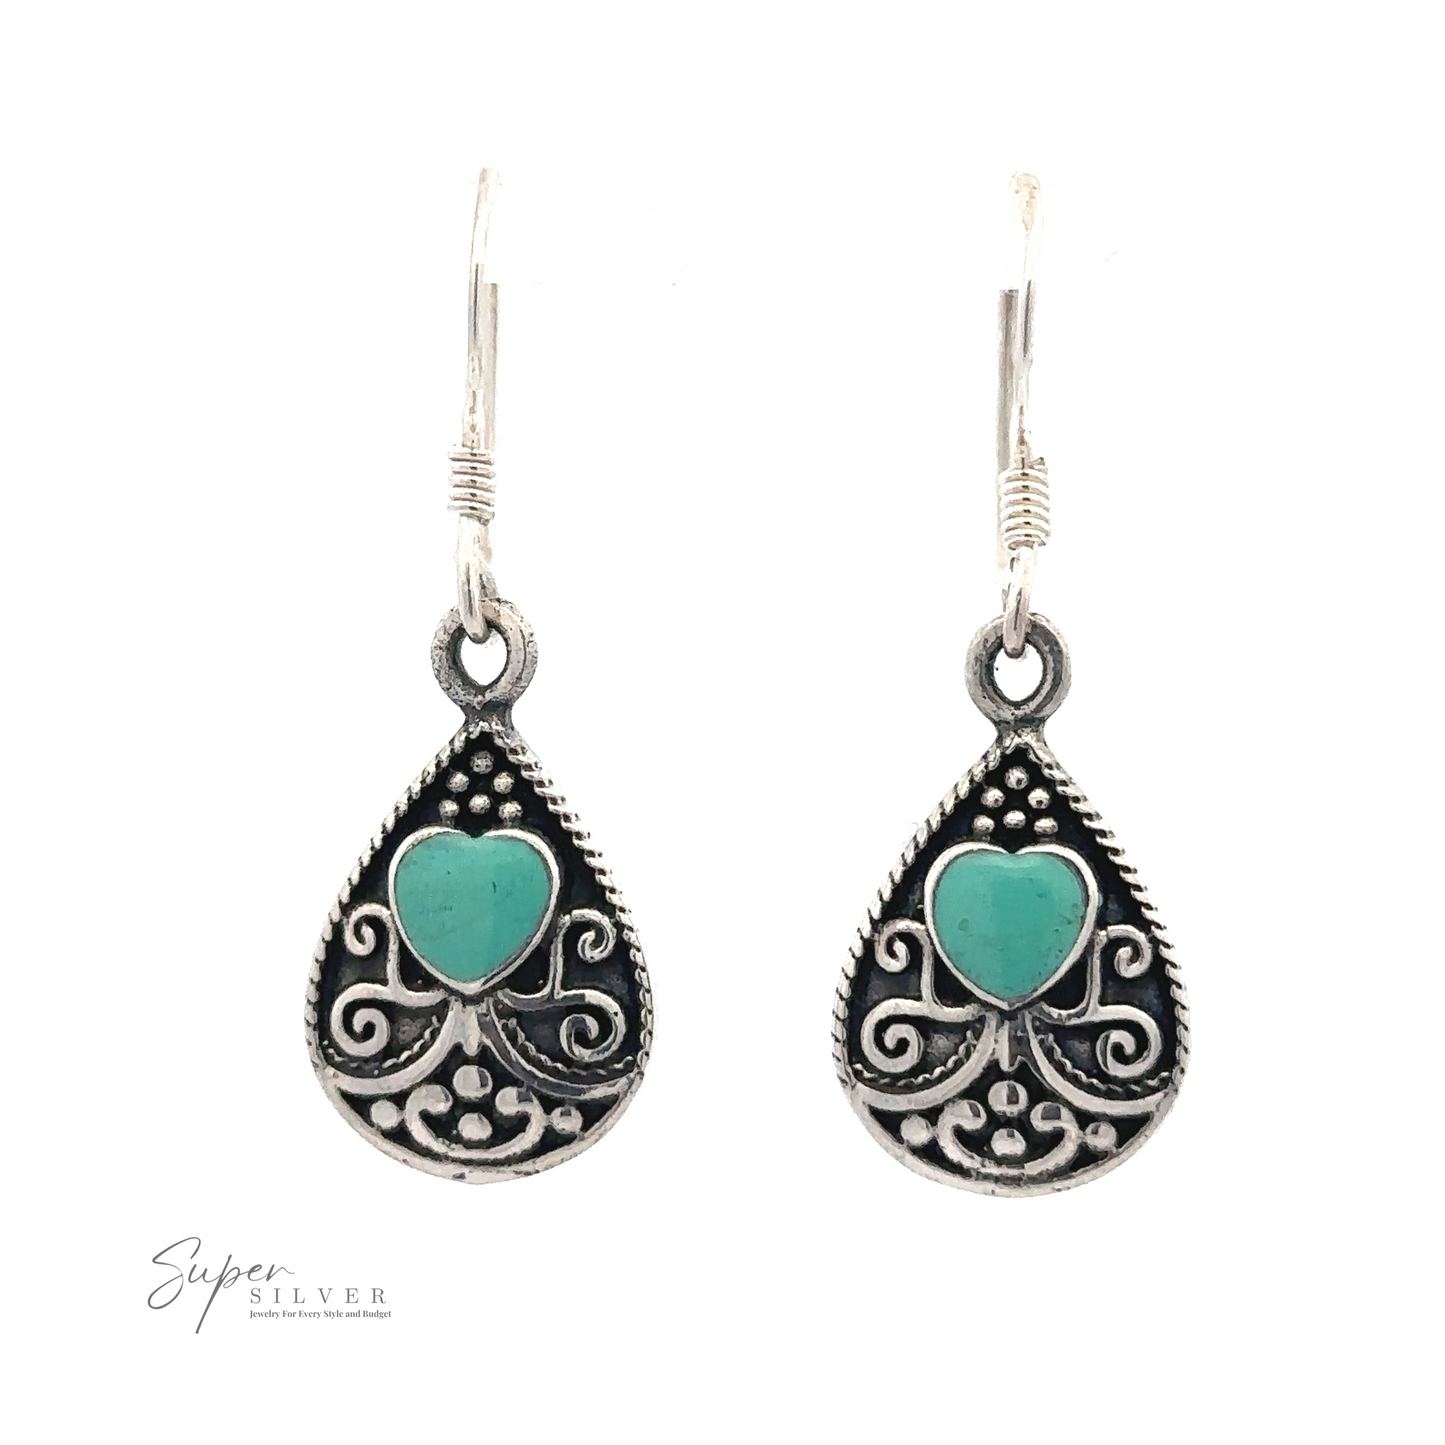 
                  
                    A pair of Bali Style Teardrop Earrings with Inlaid Stone with intricate sterling silver detailing and turquoise heart-shaped stones in the center, set against a white background. "Super Silver" logo is visible in the bottom left corner.
                  
                